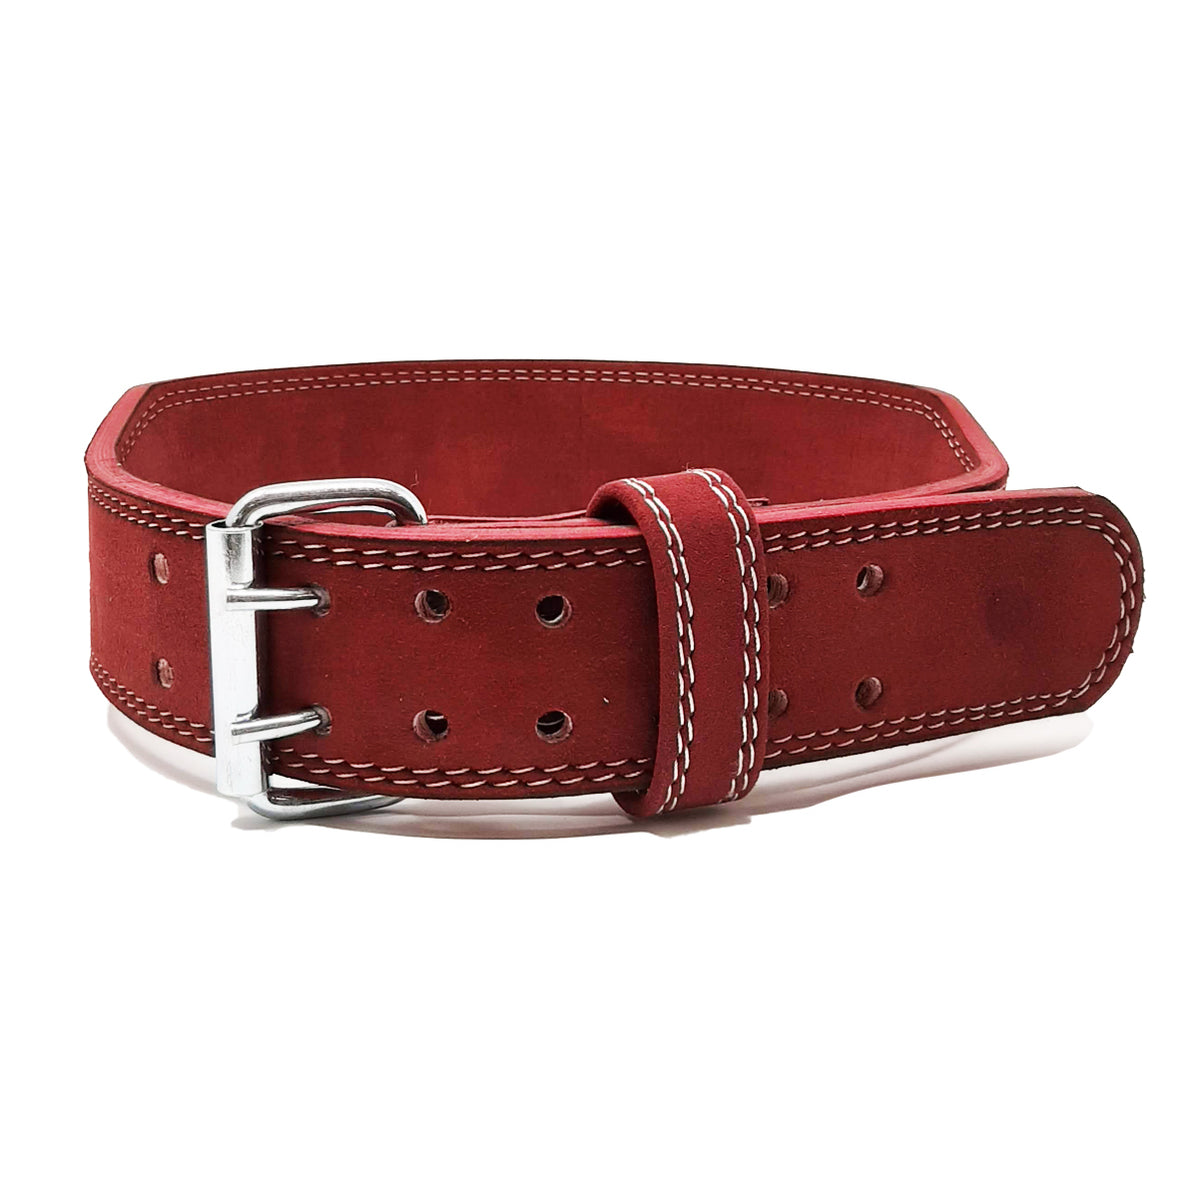 Single and Double Prong Belts | Strength Shop